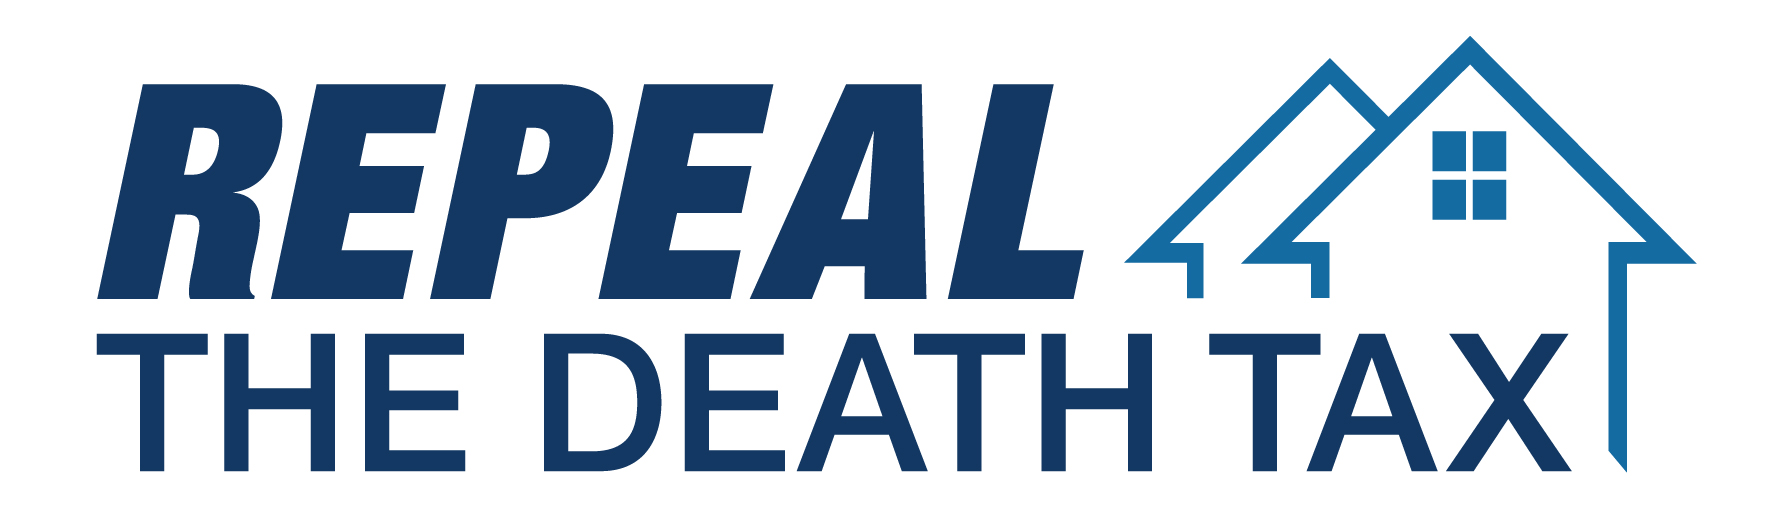 Repeal the Death Tax